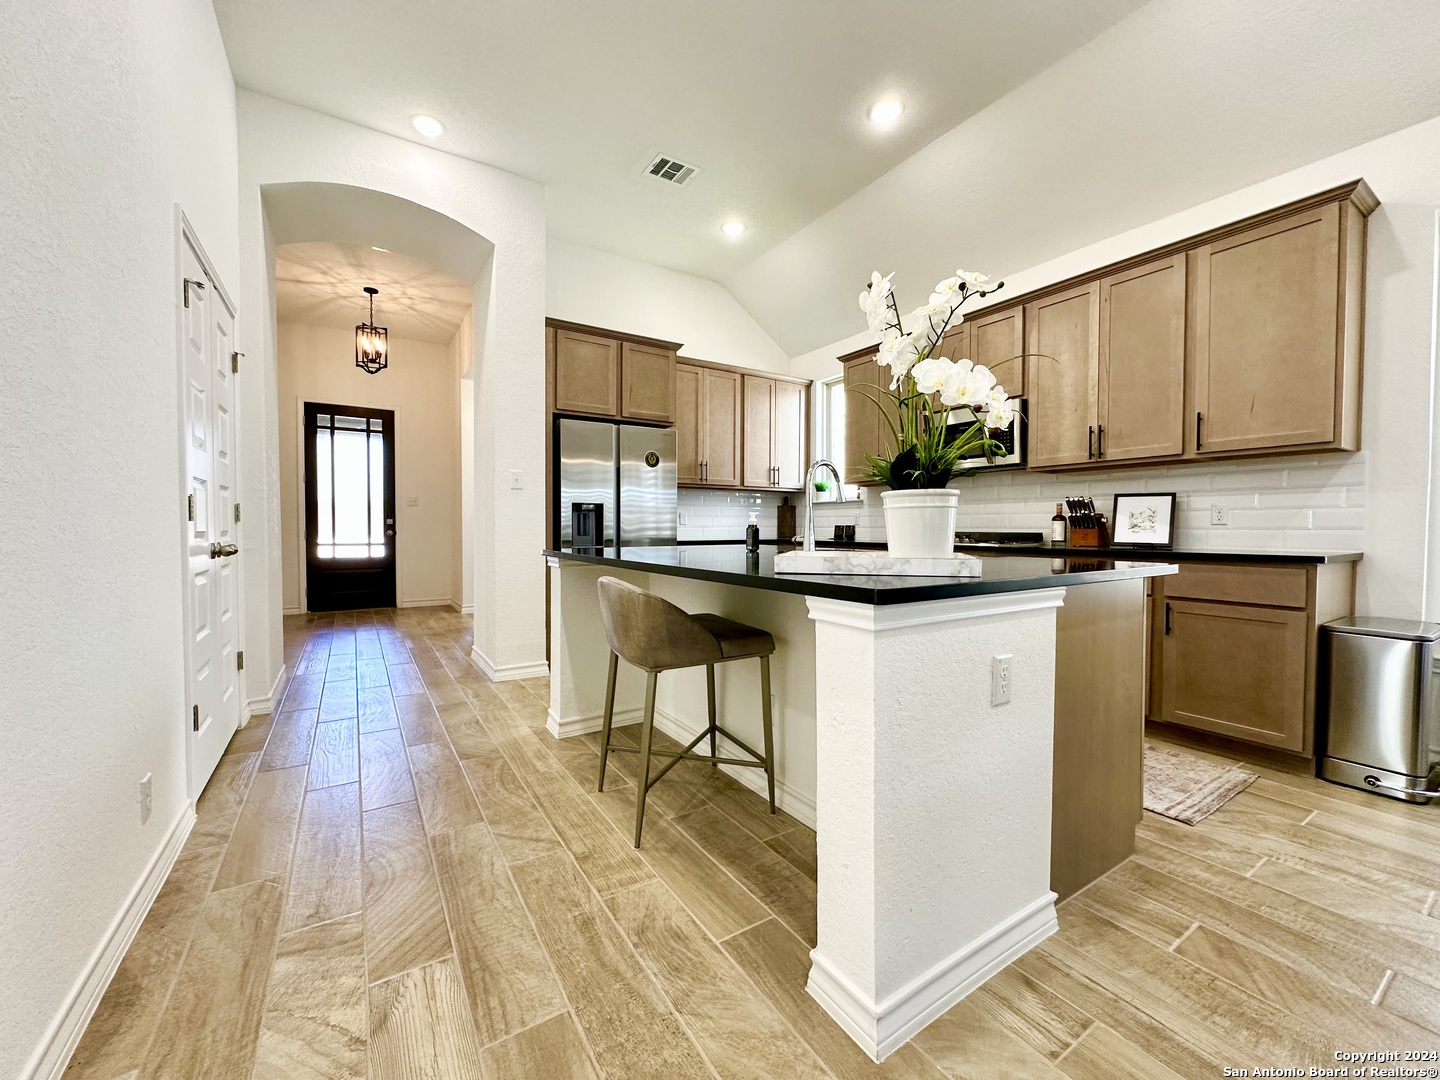 a kitchen with kitchen island granite countertop wooden floors and stainless steel appliances